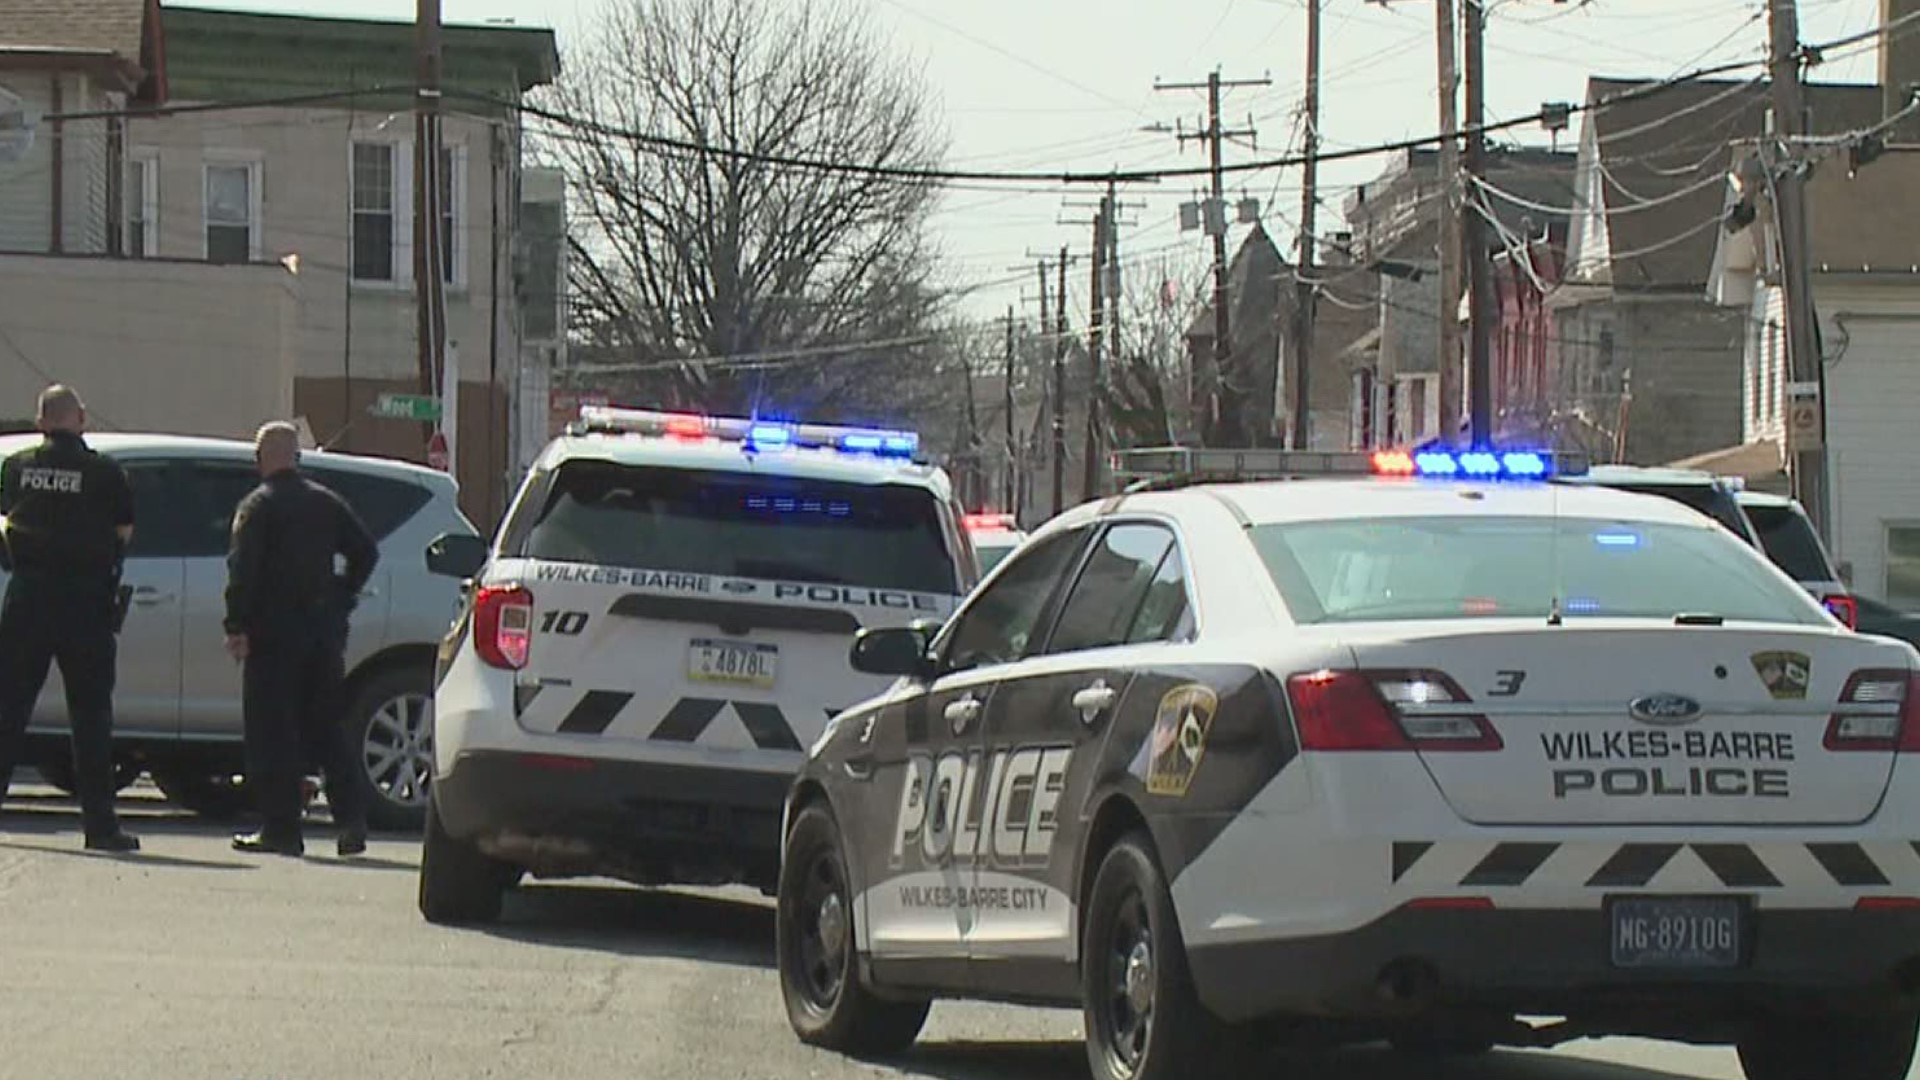 Police are investigating shots fired Wednesday afternoon in south Wilkes-Barre.